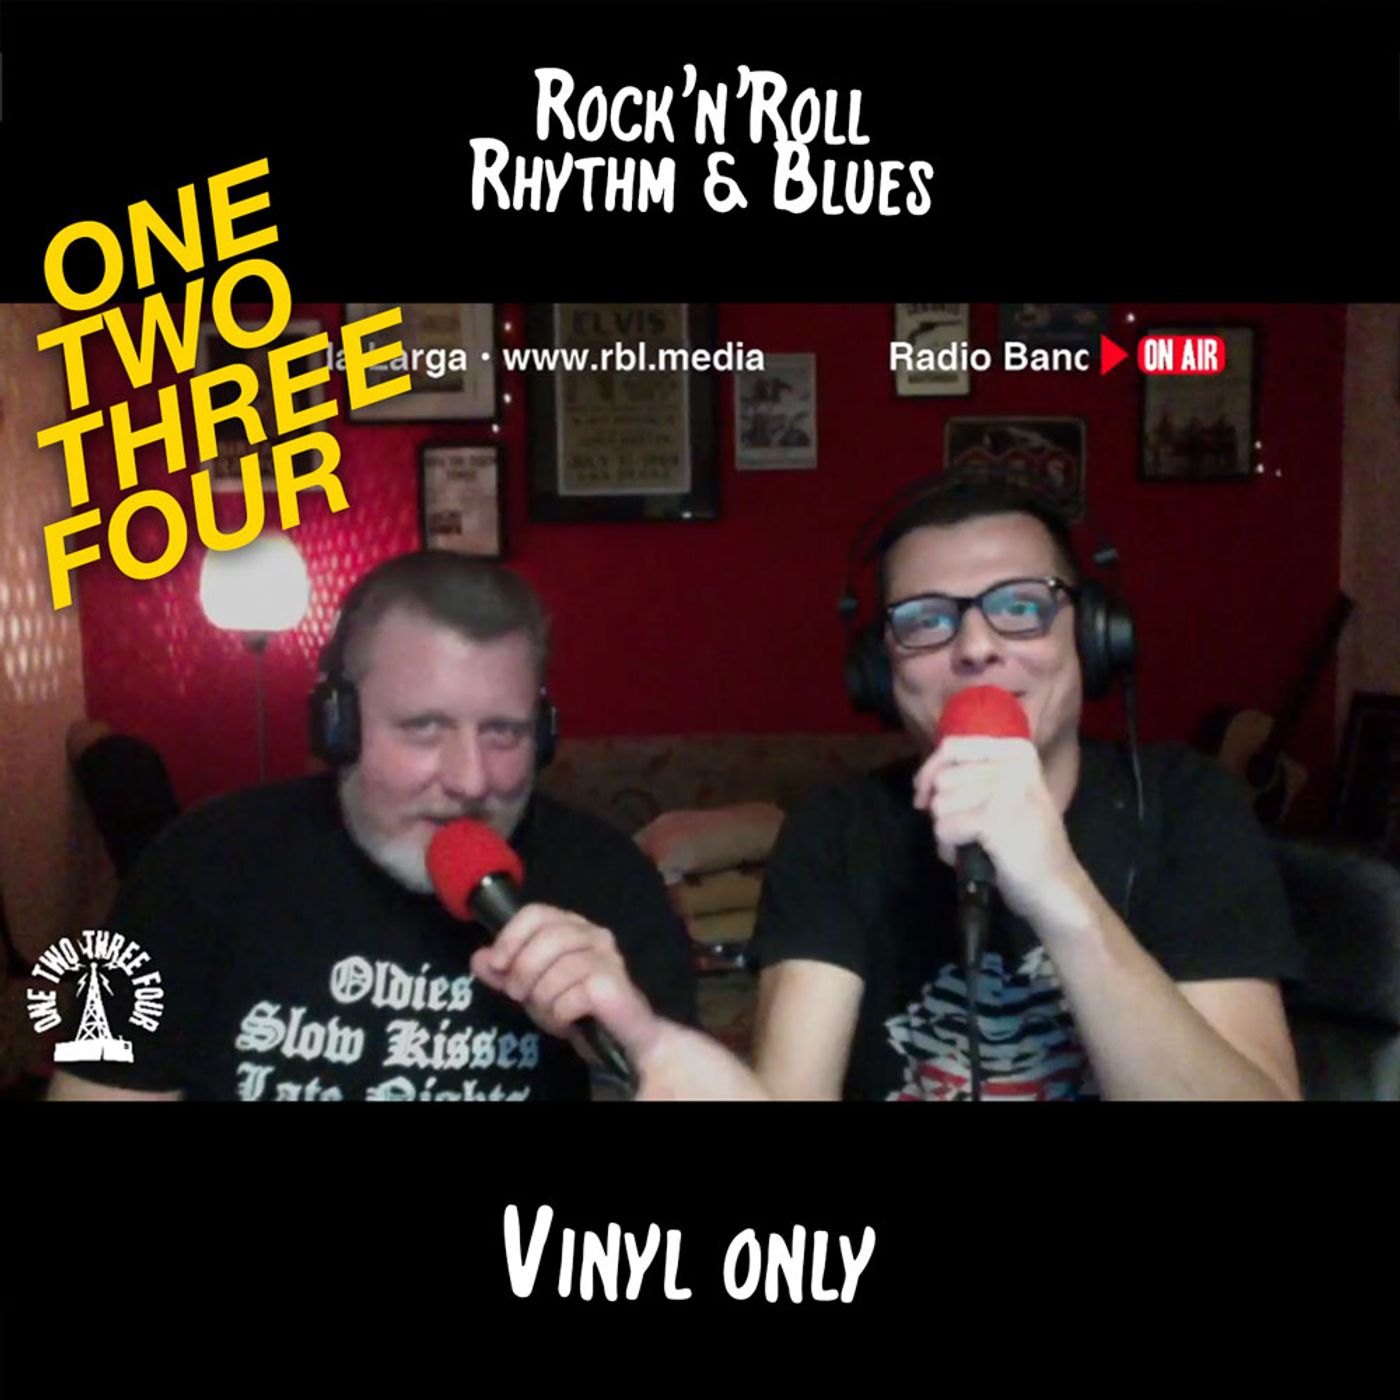 1234 Vinyl Only • finest Rock'n'roll, Jive, R&B from the Fifties! Feb. 02, 2021